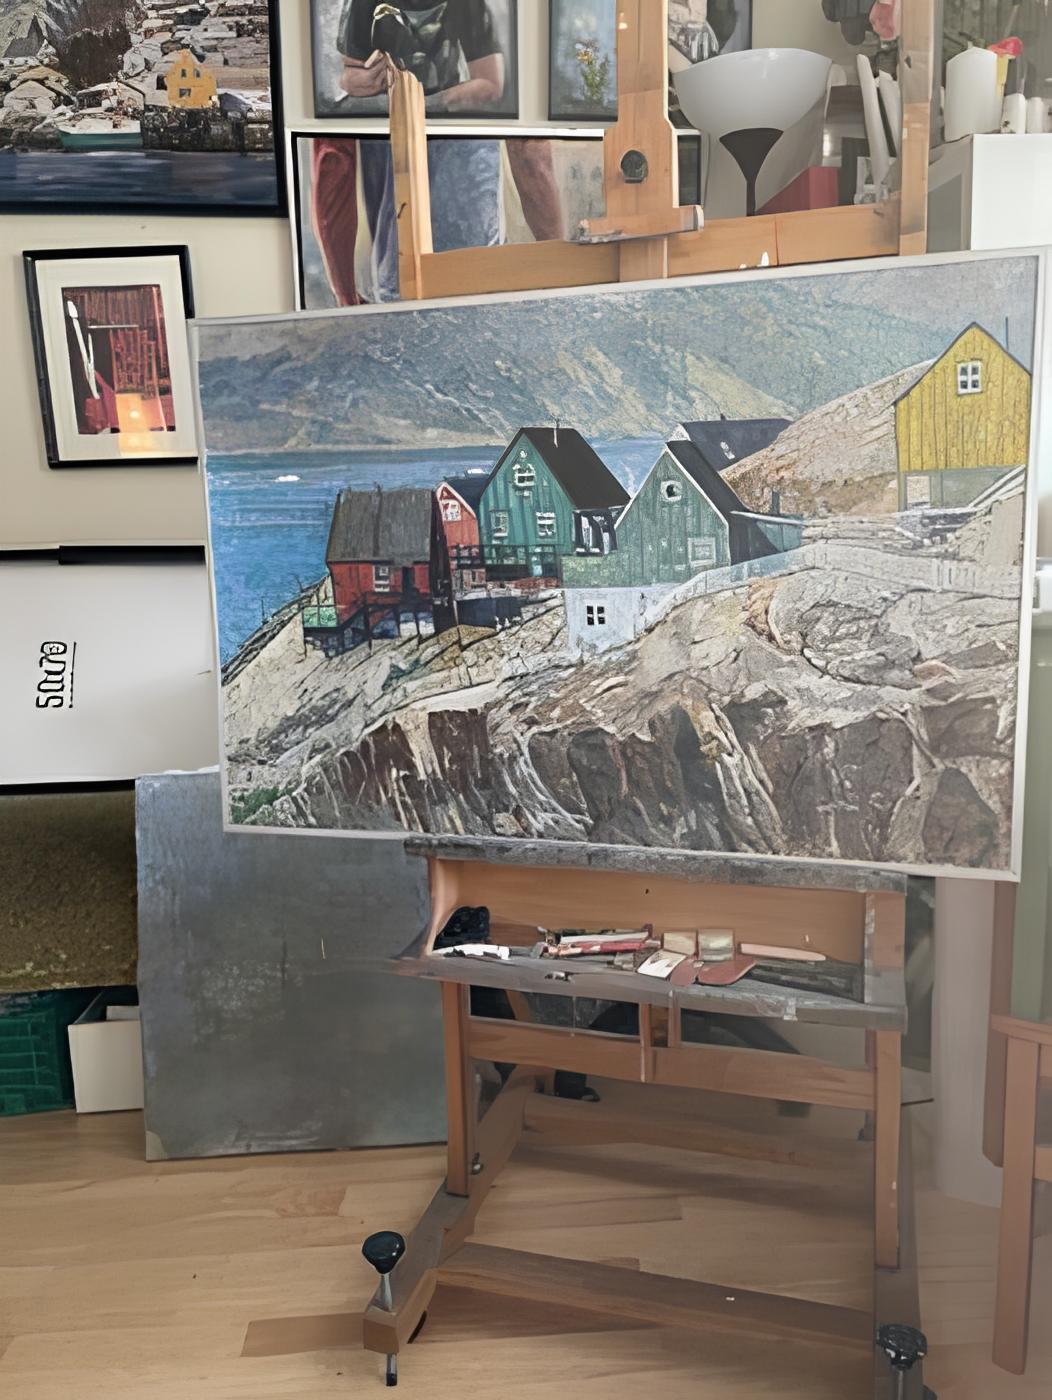 In creating this piece, I sought to capture the raw, untamed beauty of a coastal hamlet. The vibrant colors imbue life into the quaint homes, juxtaposing the rough, unyielding cliffs. Painted with oils, my brushstrokes blend impressionism with